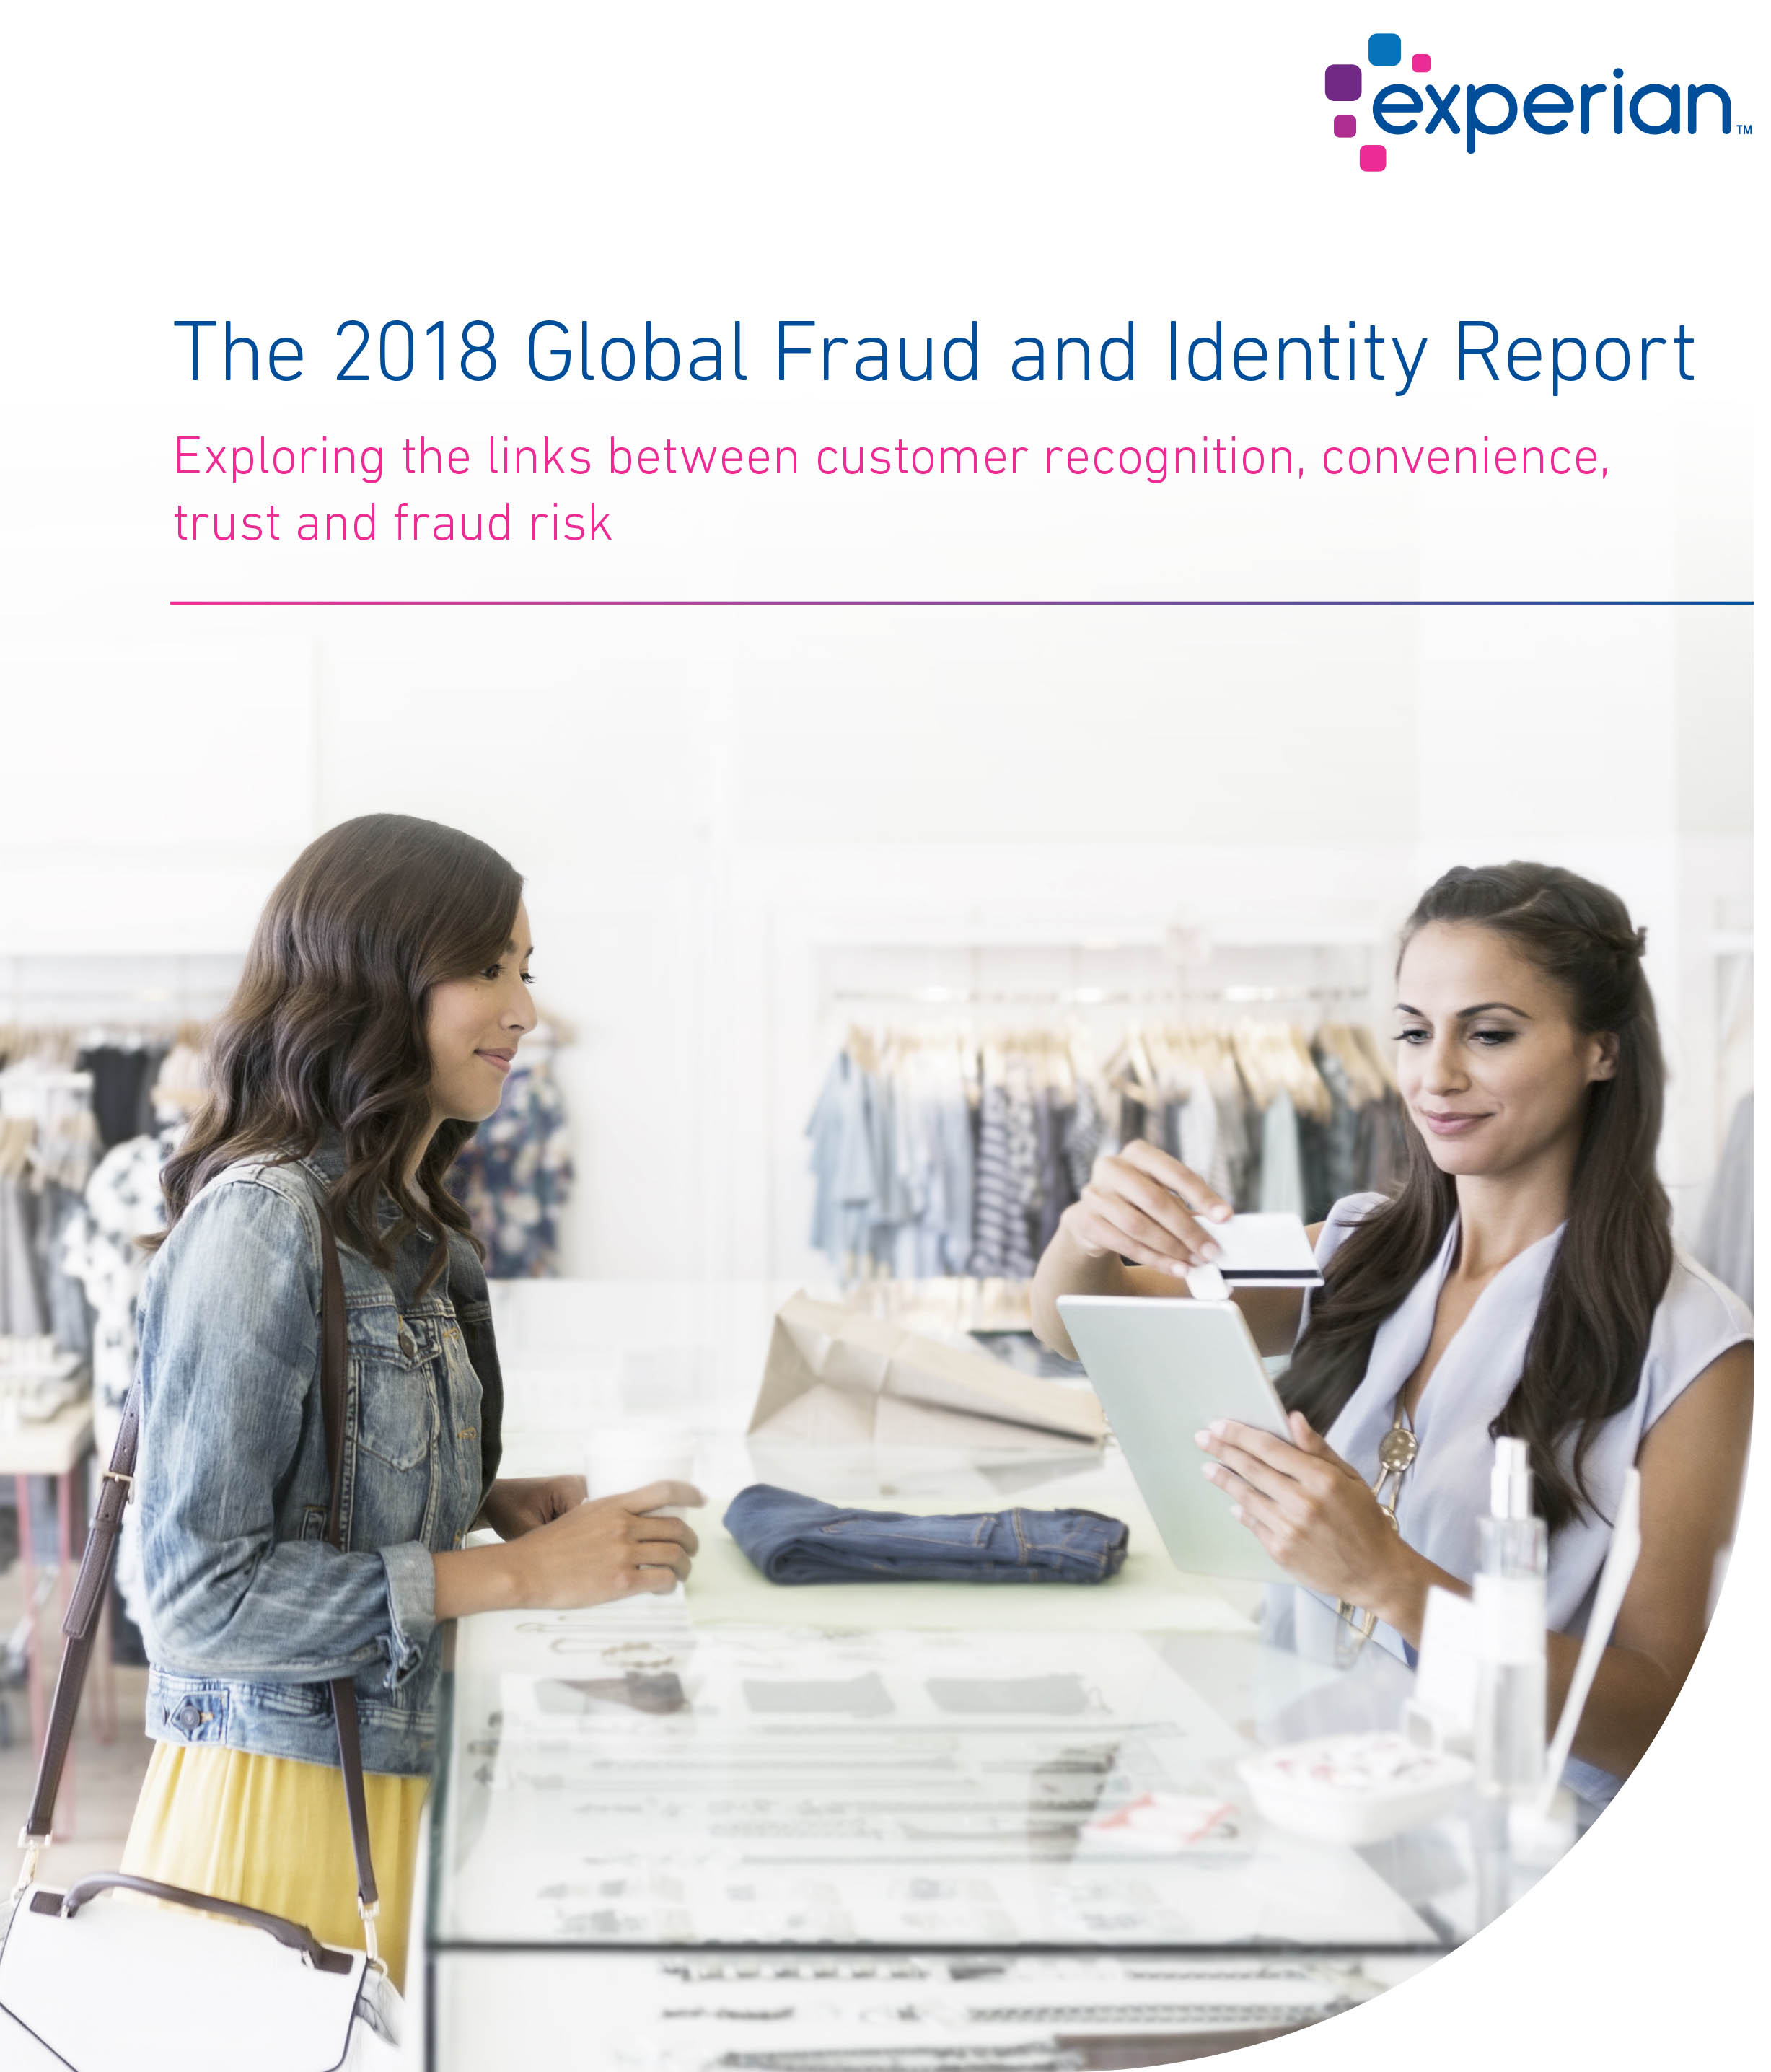 The 2018 Global Fraud and Identity Report